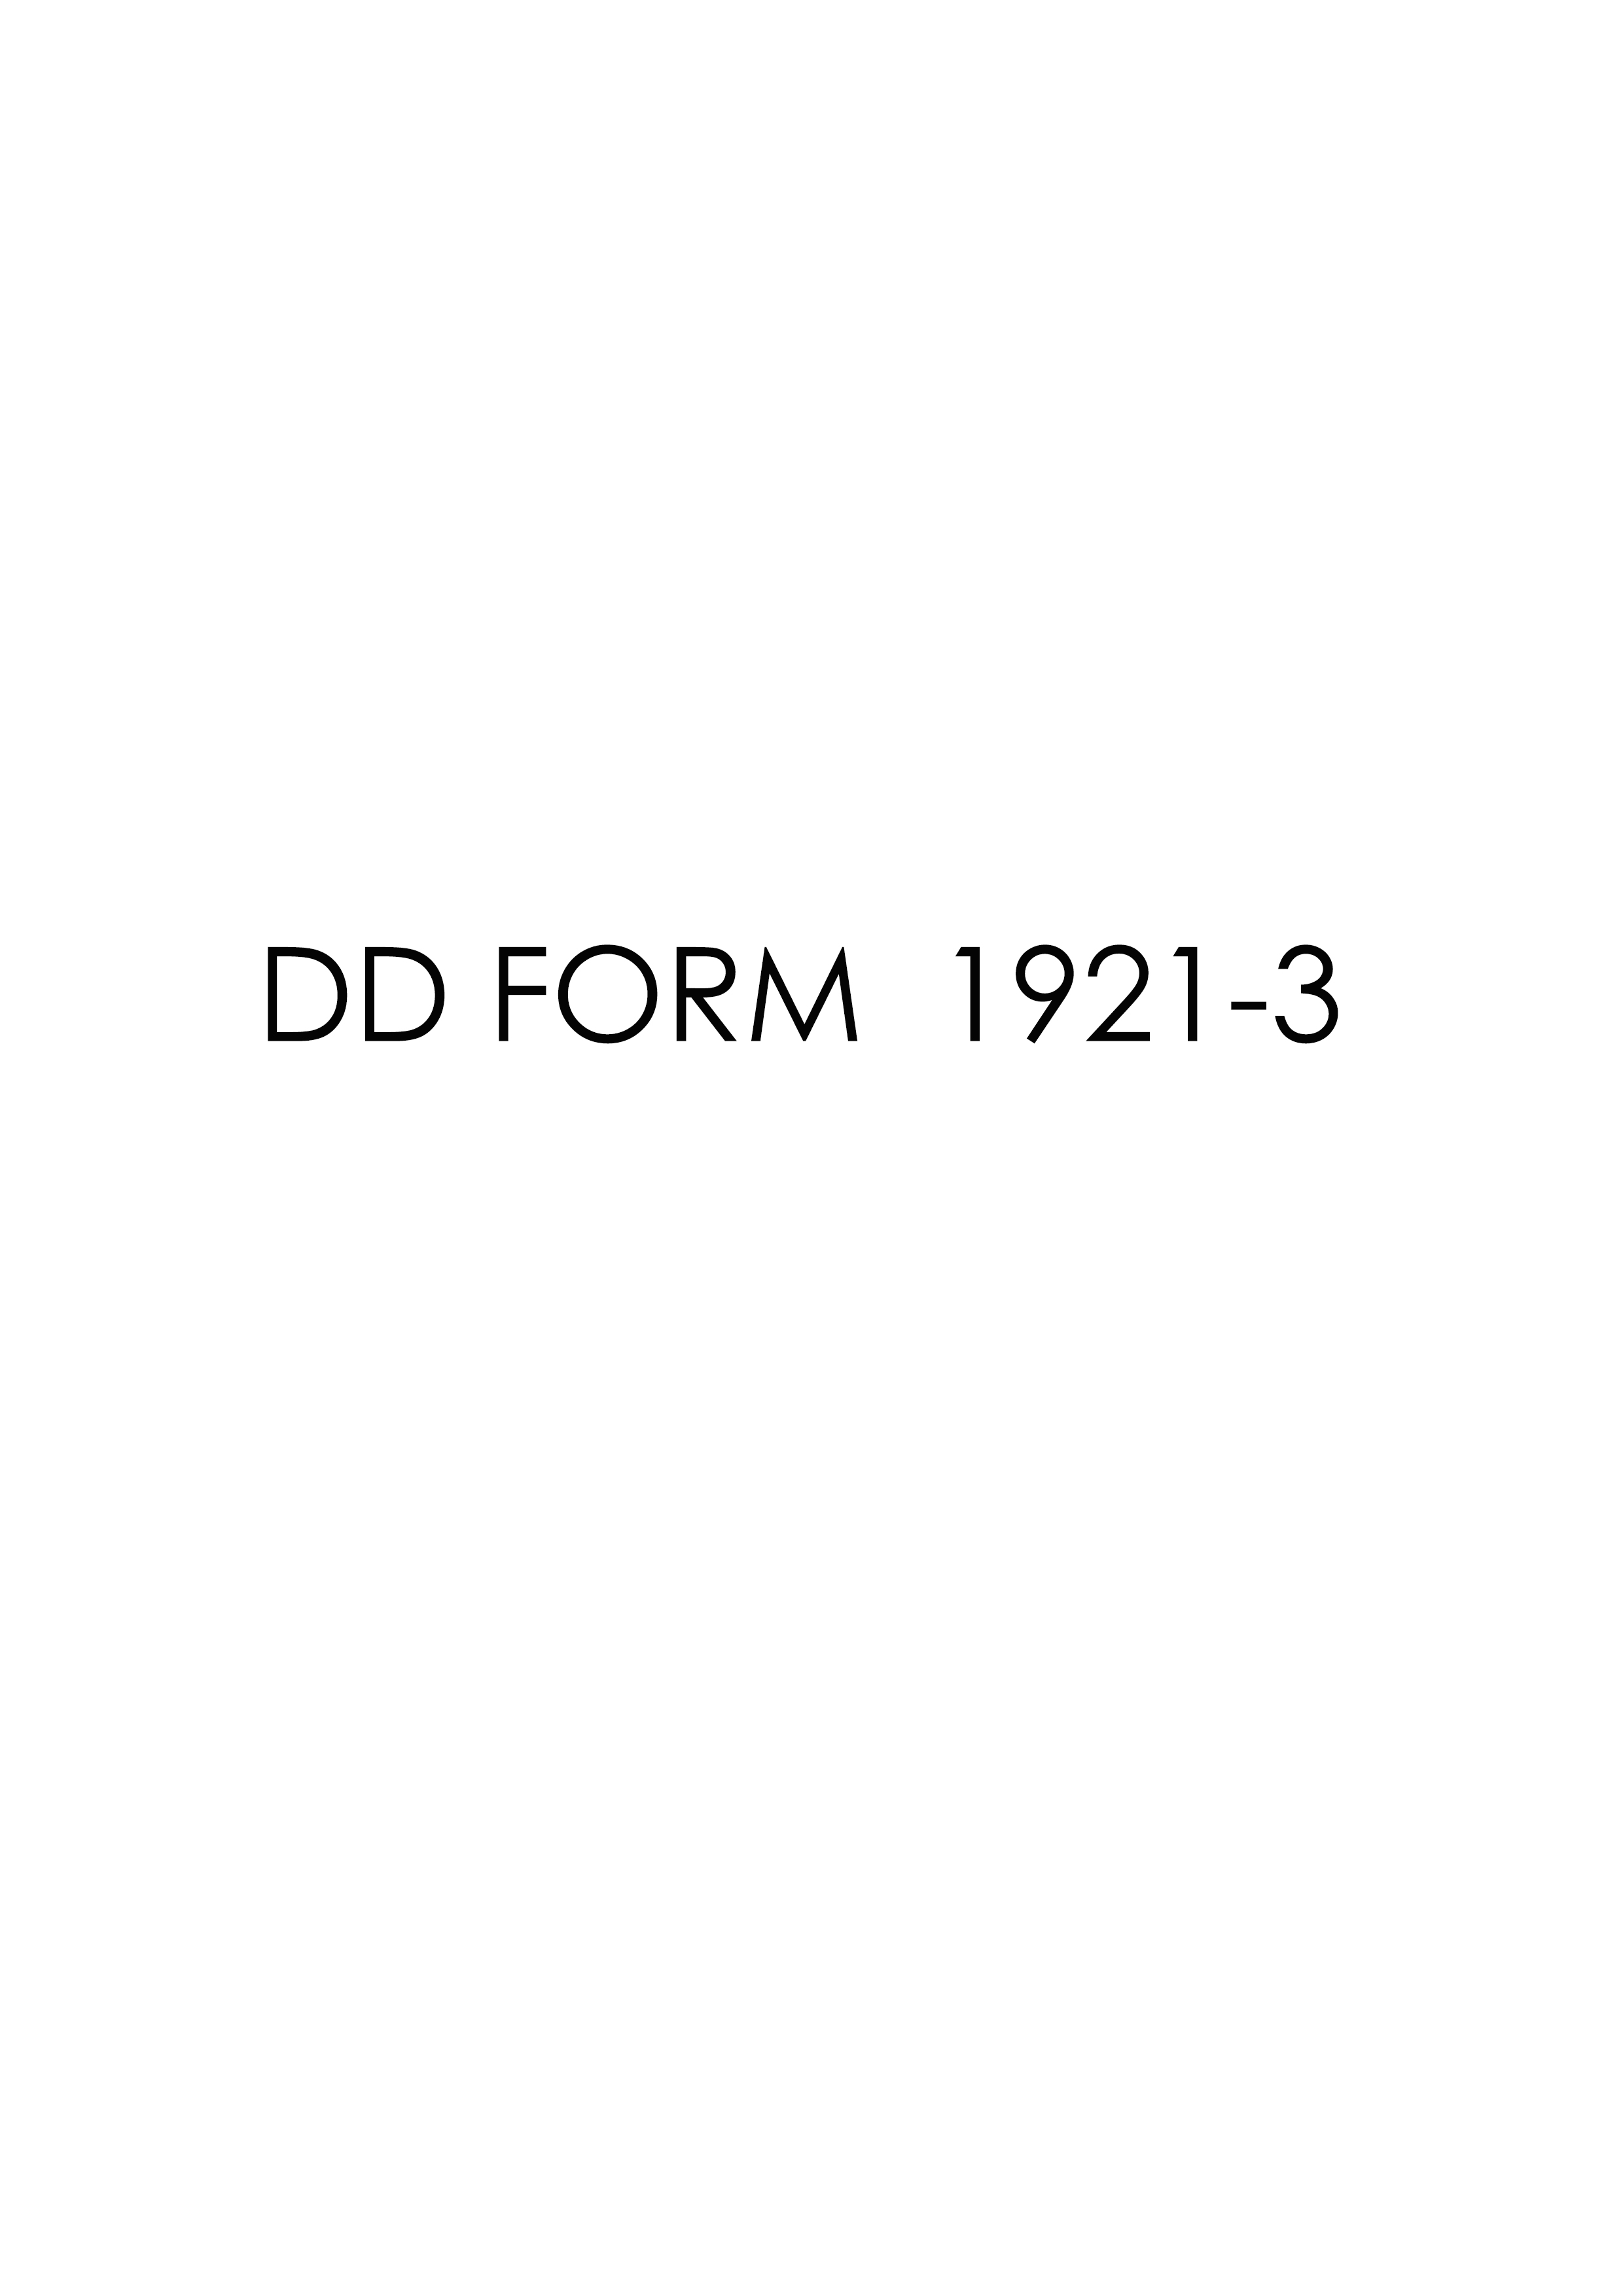 Download Fillable dd Form 1921-3